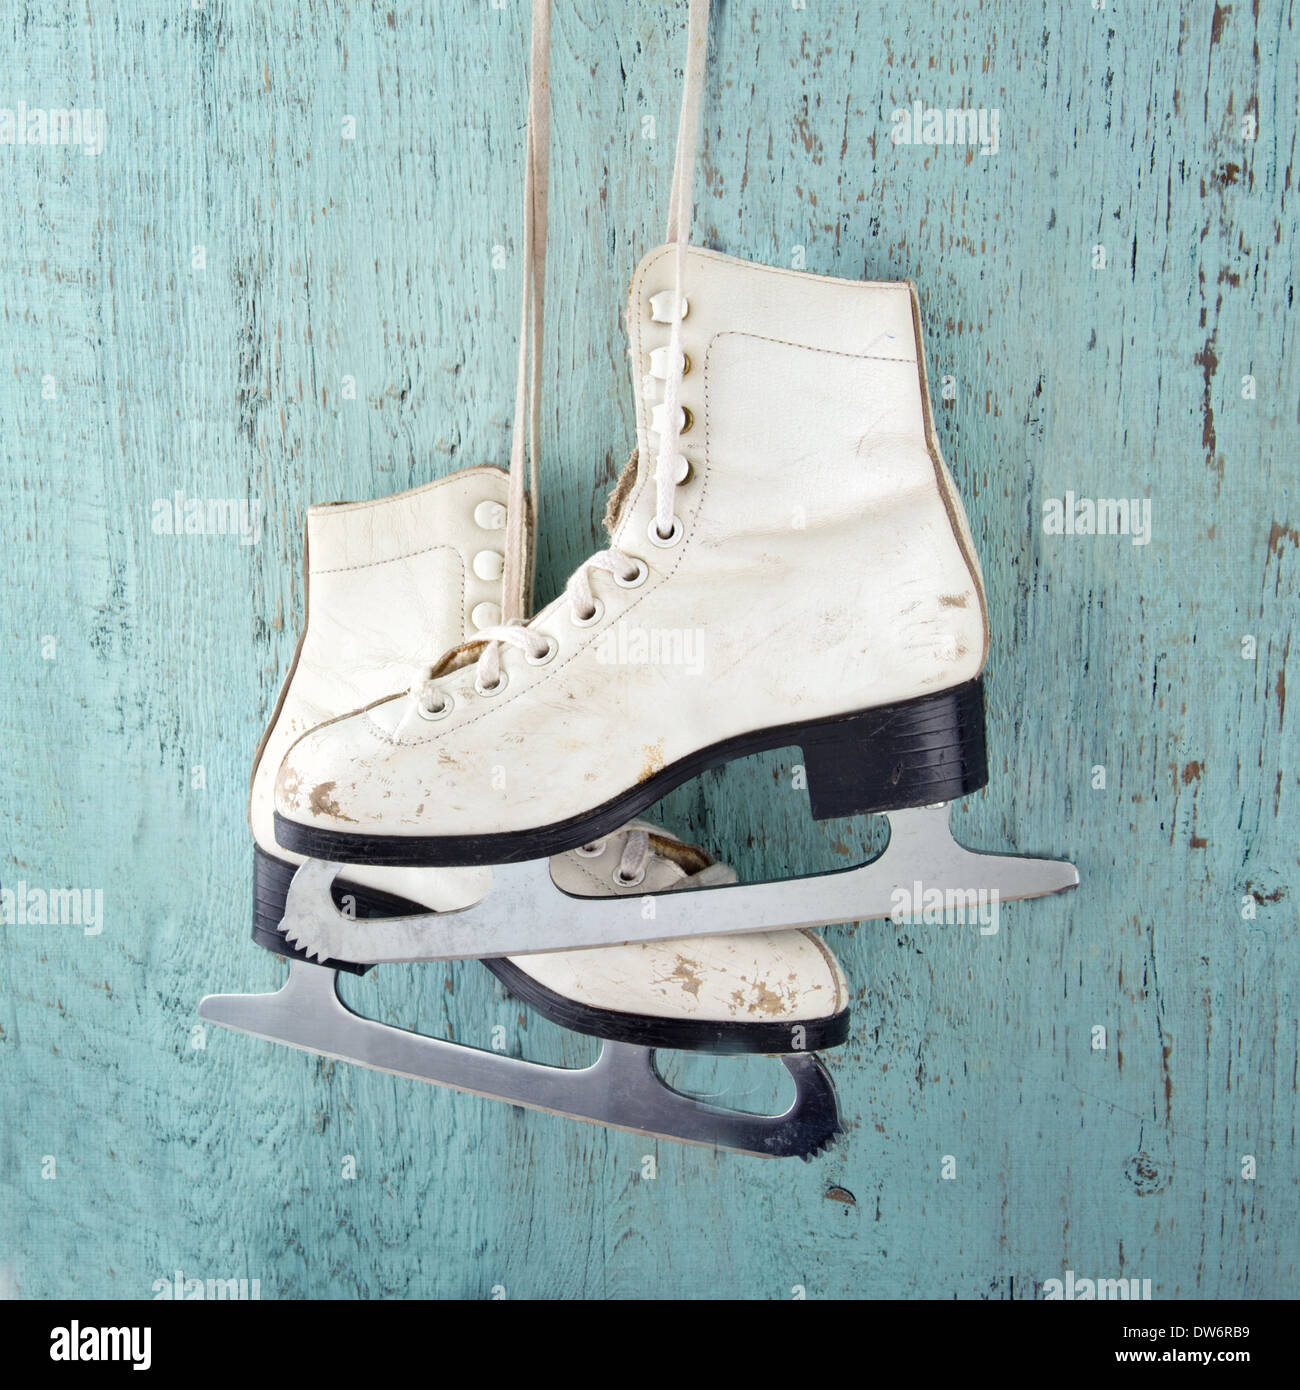 https://c8.alamy.com/comp/DW6RB9/pair-of-white-womens-ice-skates-on-blue-vintage-wooden-background-DW6RB9.jpg